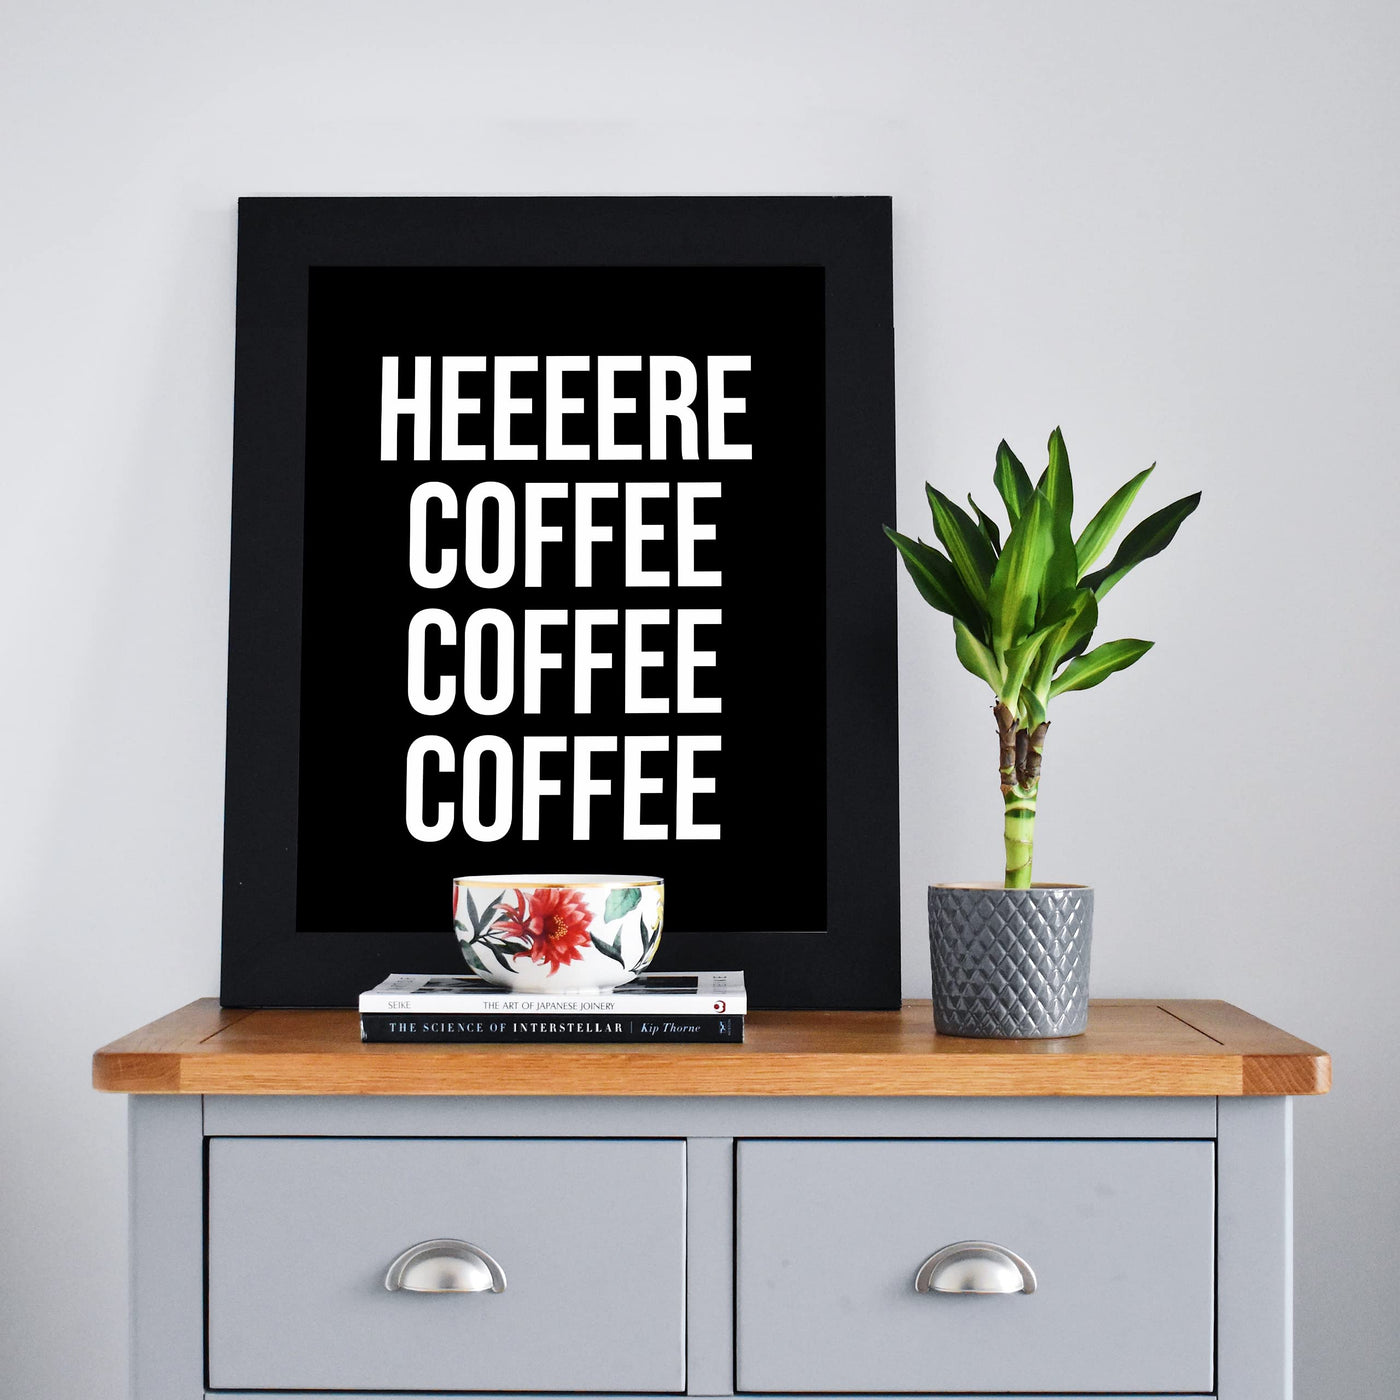 Heeere Coffee Coffee Coffee Funny Kitchen Wall Sign -8 x 10" Modern Typography Art Print -Ready to Frame. Humorous Home-Office-Java Bar Decor. Great Desk & Cubicle Sign -Fun Gift for Coffee Lovers!